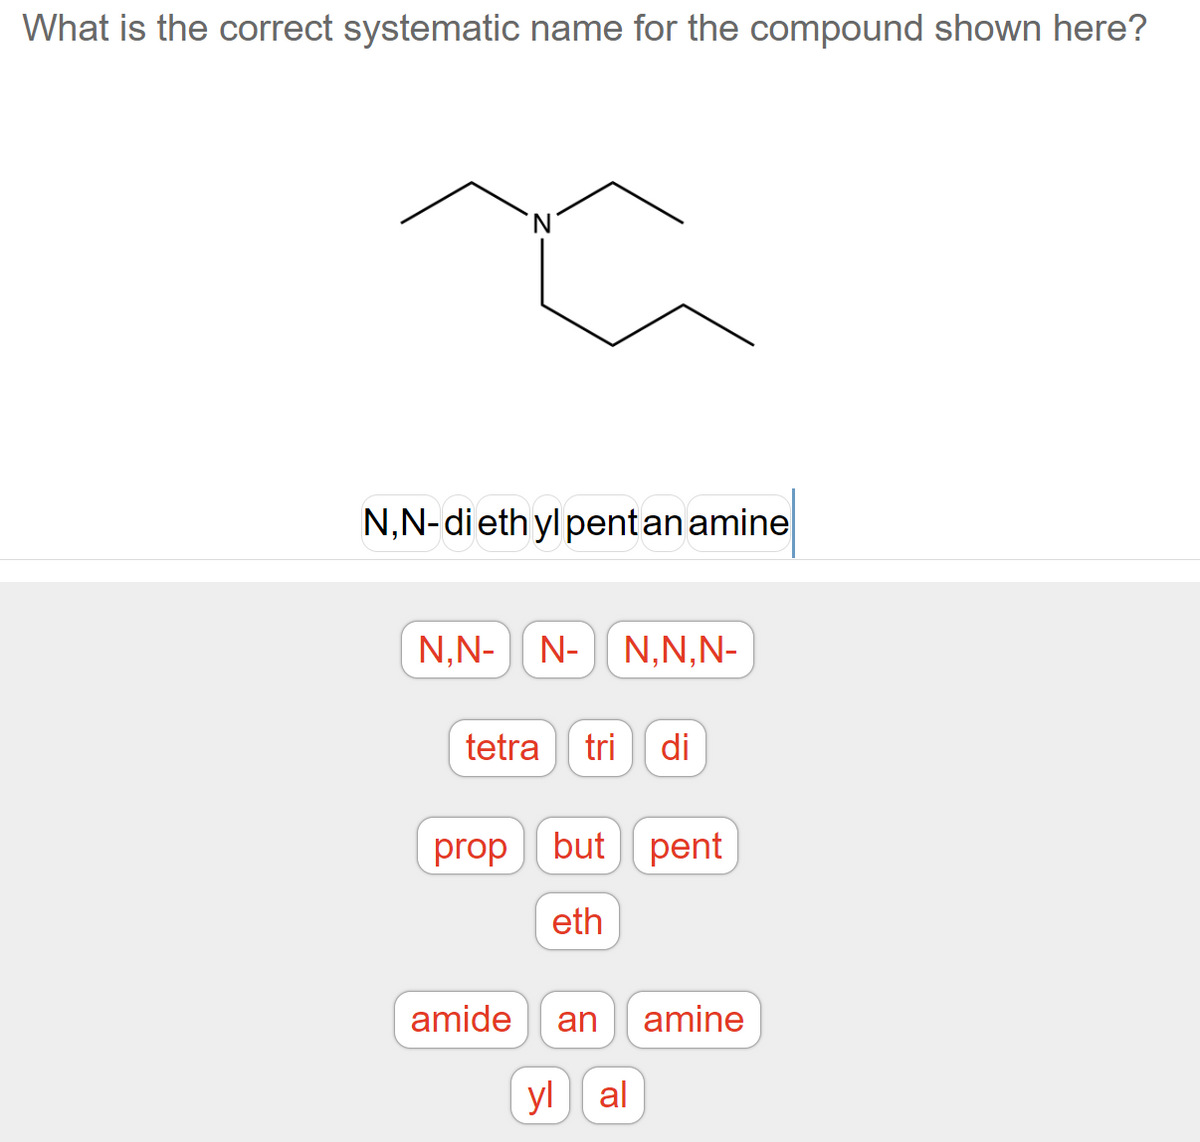 What is the correct systematic name for the compound shown here?
N
a
N,N-diethyl pent an amine
N,N- N- N,N,N-
tetra tri di
prop but pent
eth
amide an amine
yl al